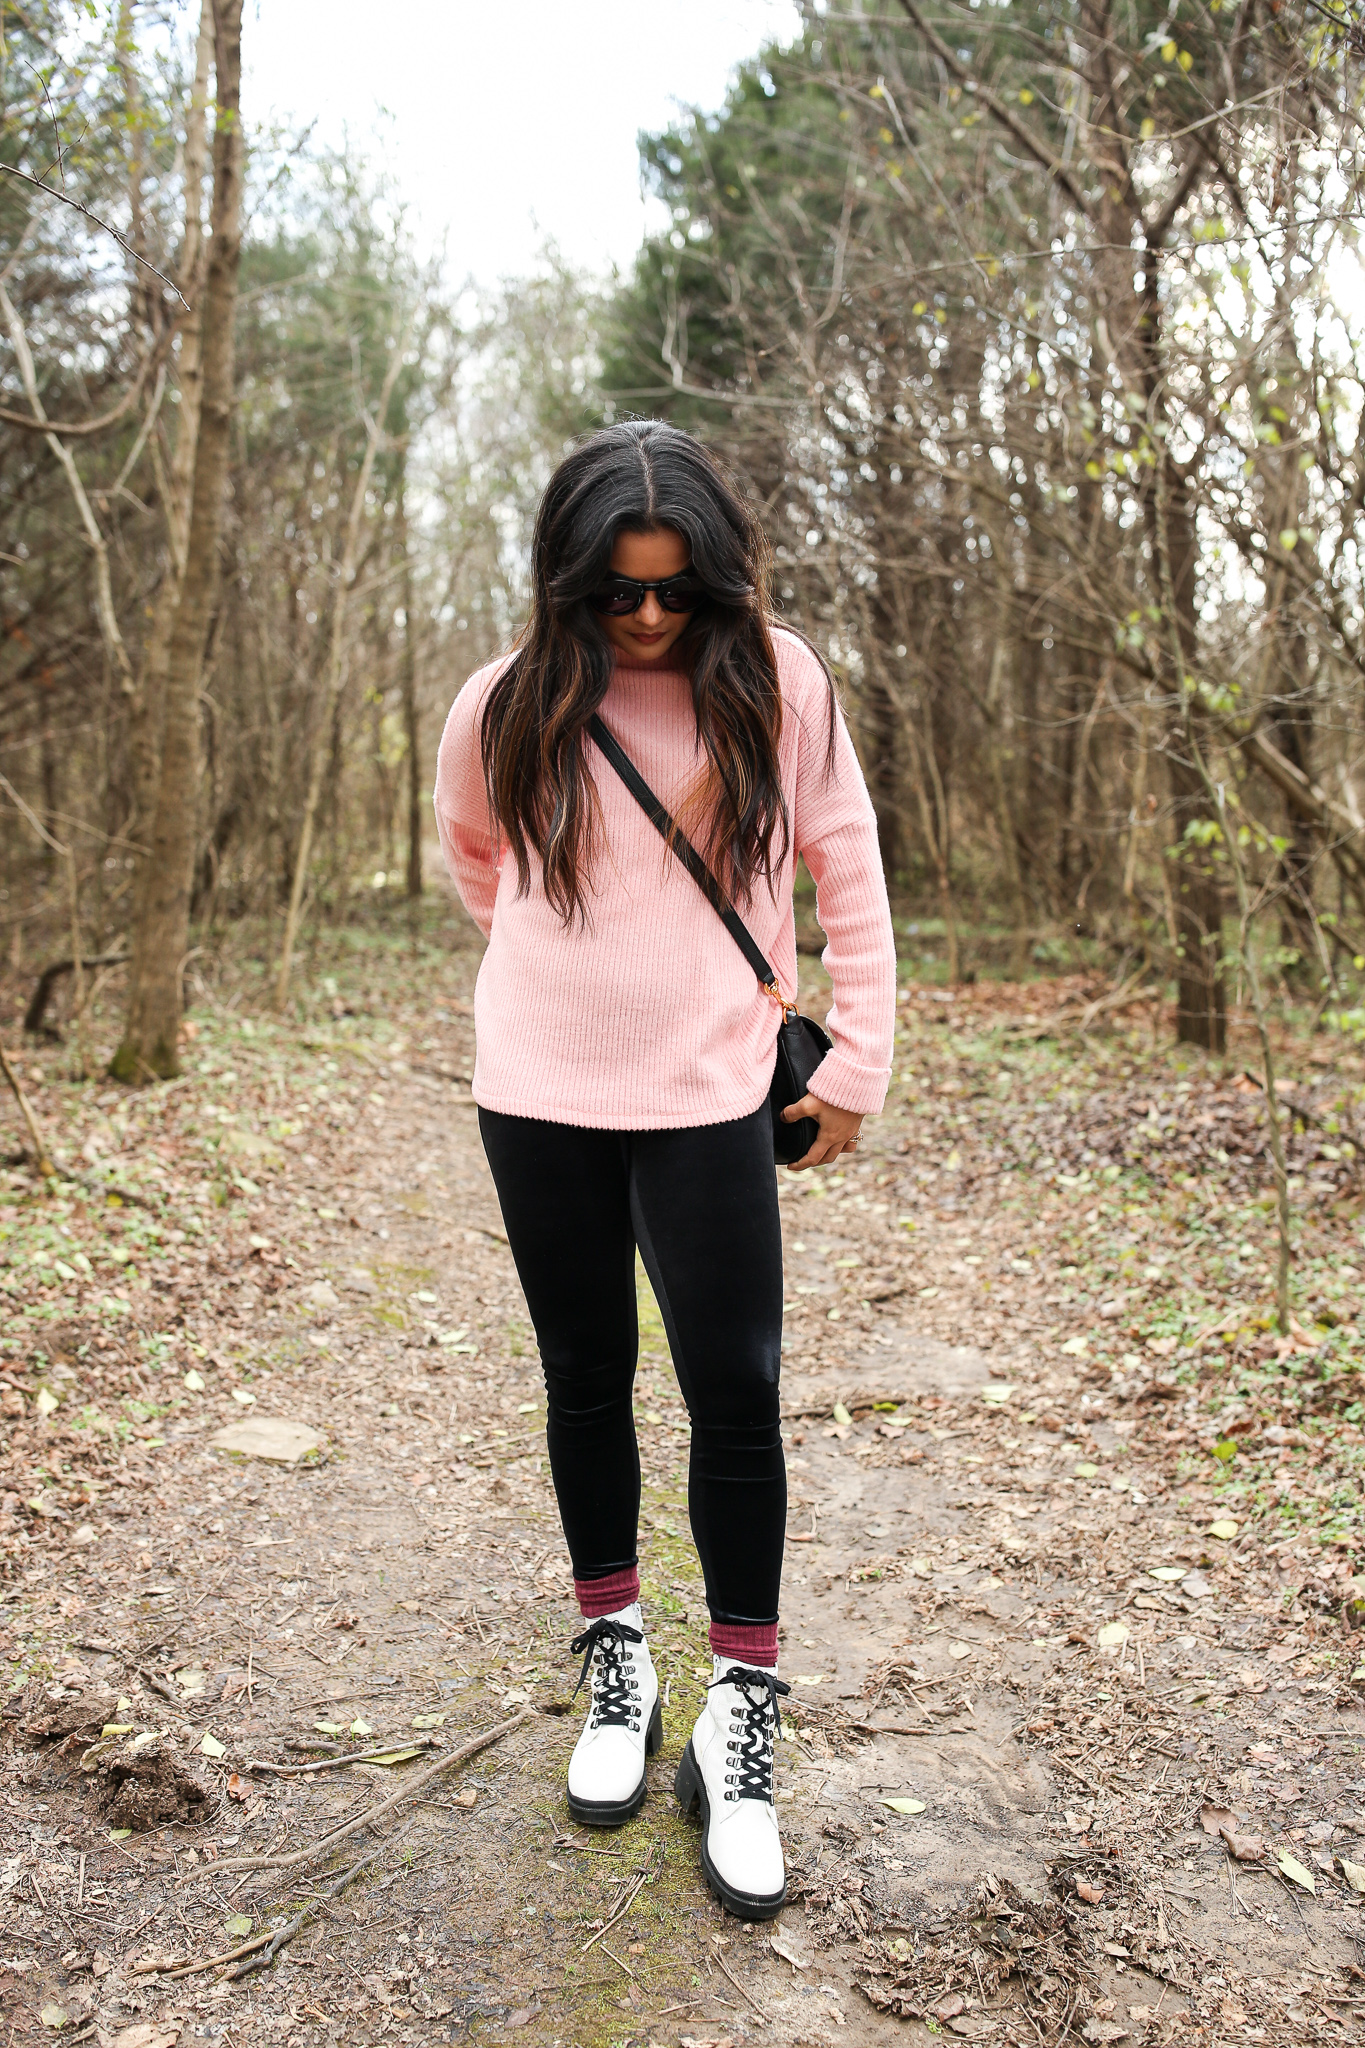 Priya the Blog, Nashville fashion blog, Nashville fashion blogger, Winter outfit, Winter style, how to style a pink sweater, how to style white combat boots, white combat boots, Spanx velvet leggings, how to style Spanx velvet leggings, velvet leggings outfit, personal style uniforms